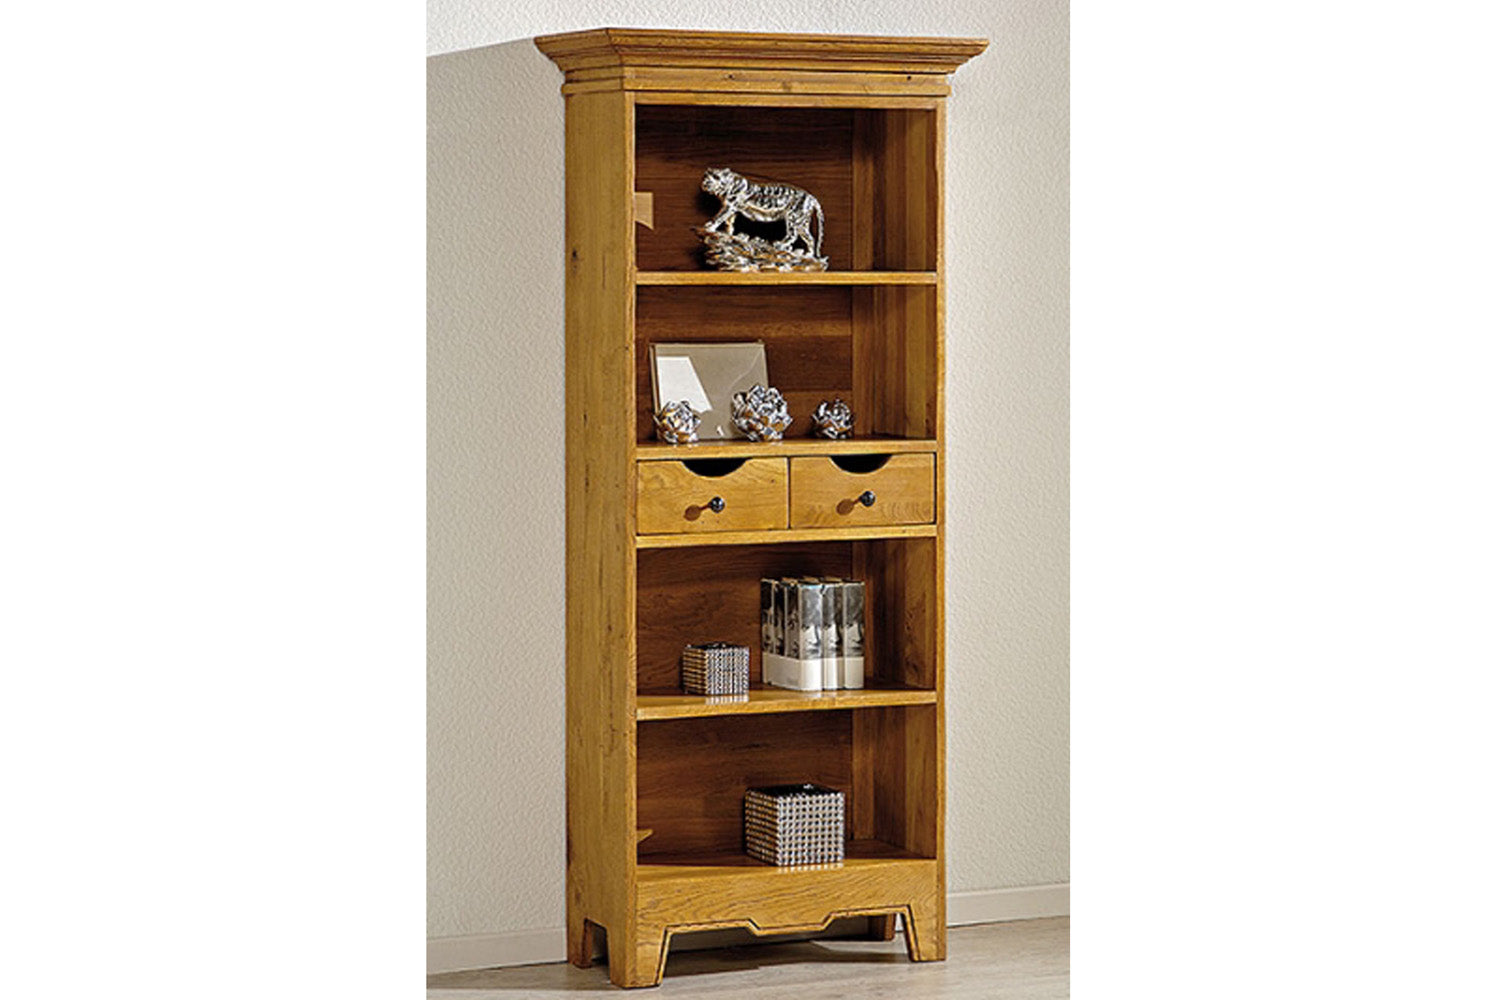 French Mountain Oak Villages Range Bookcase Narrow And Tall